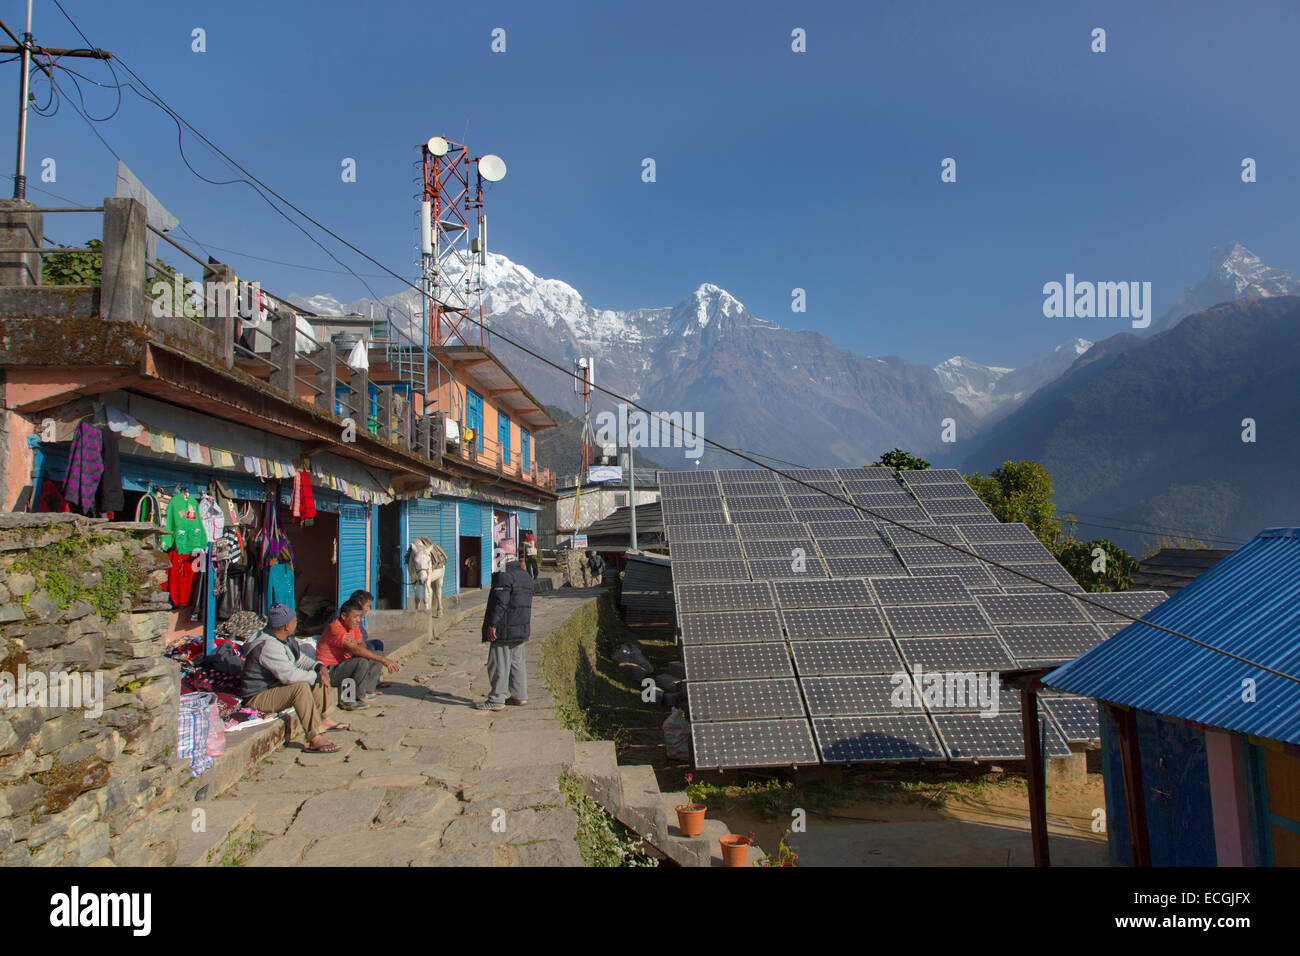 The Mountain village of Ghandruk and new solar panels for green energy around 2000 metres with Annapurna in background Stock Photo